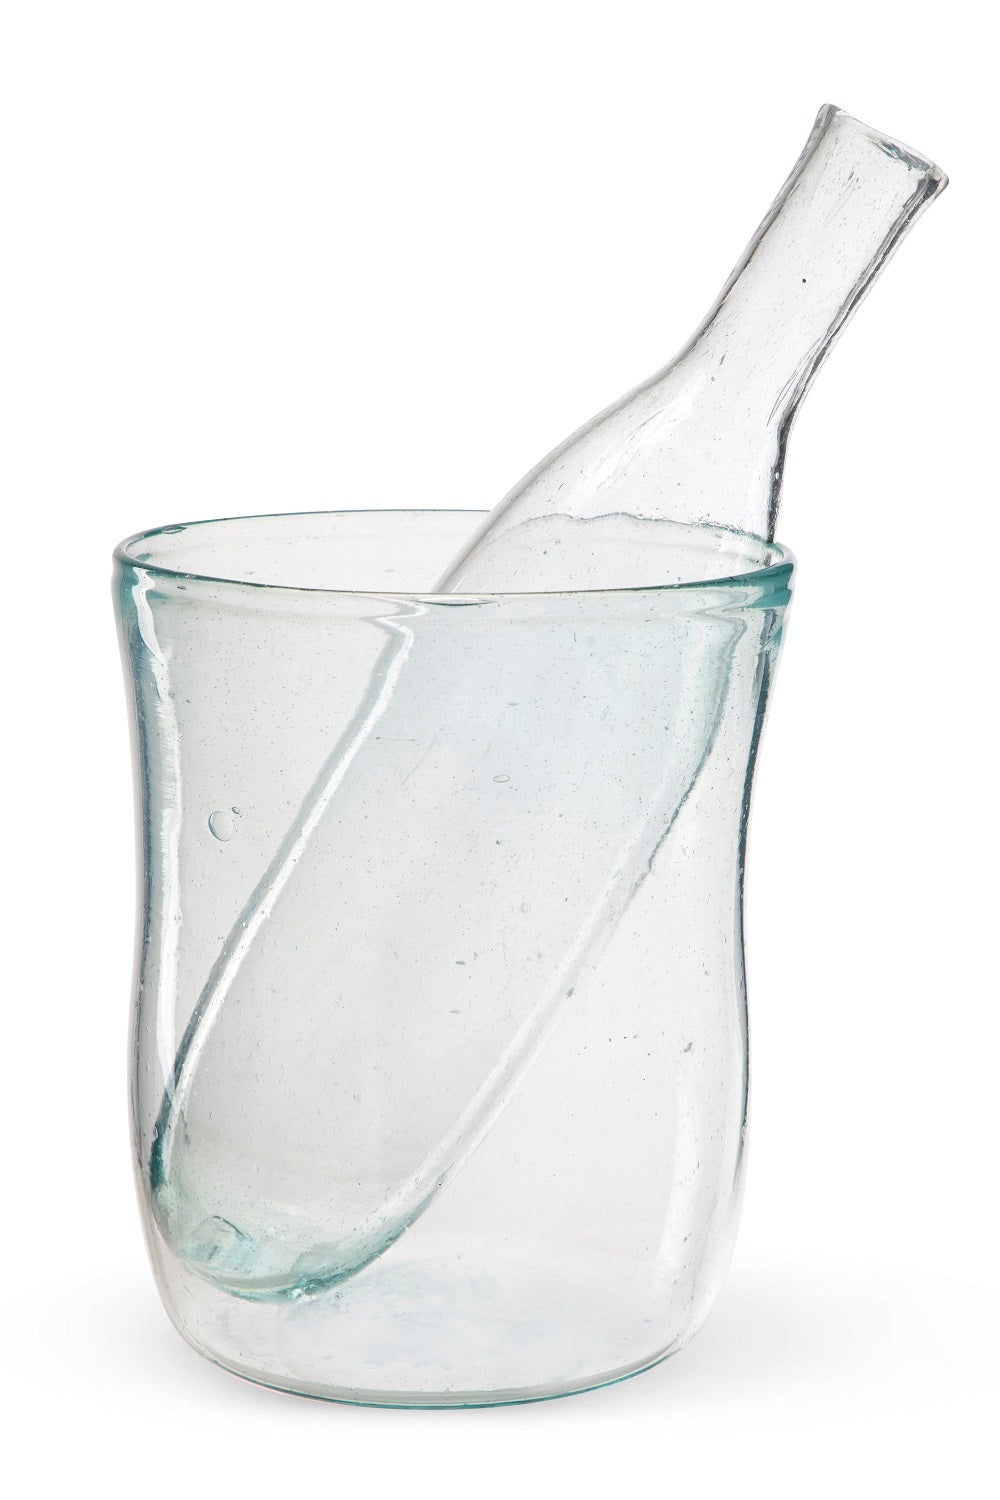 Shop The Latest Collection Of Images D'Orient Beirut Collection Ice Bucket With Bottle 1L Clear - Bey-100111 In Lebanon